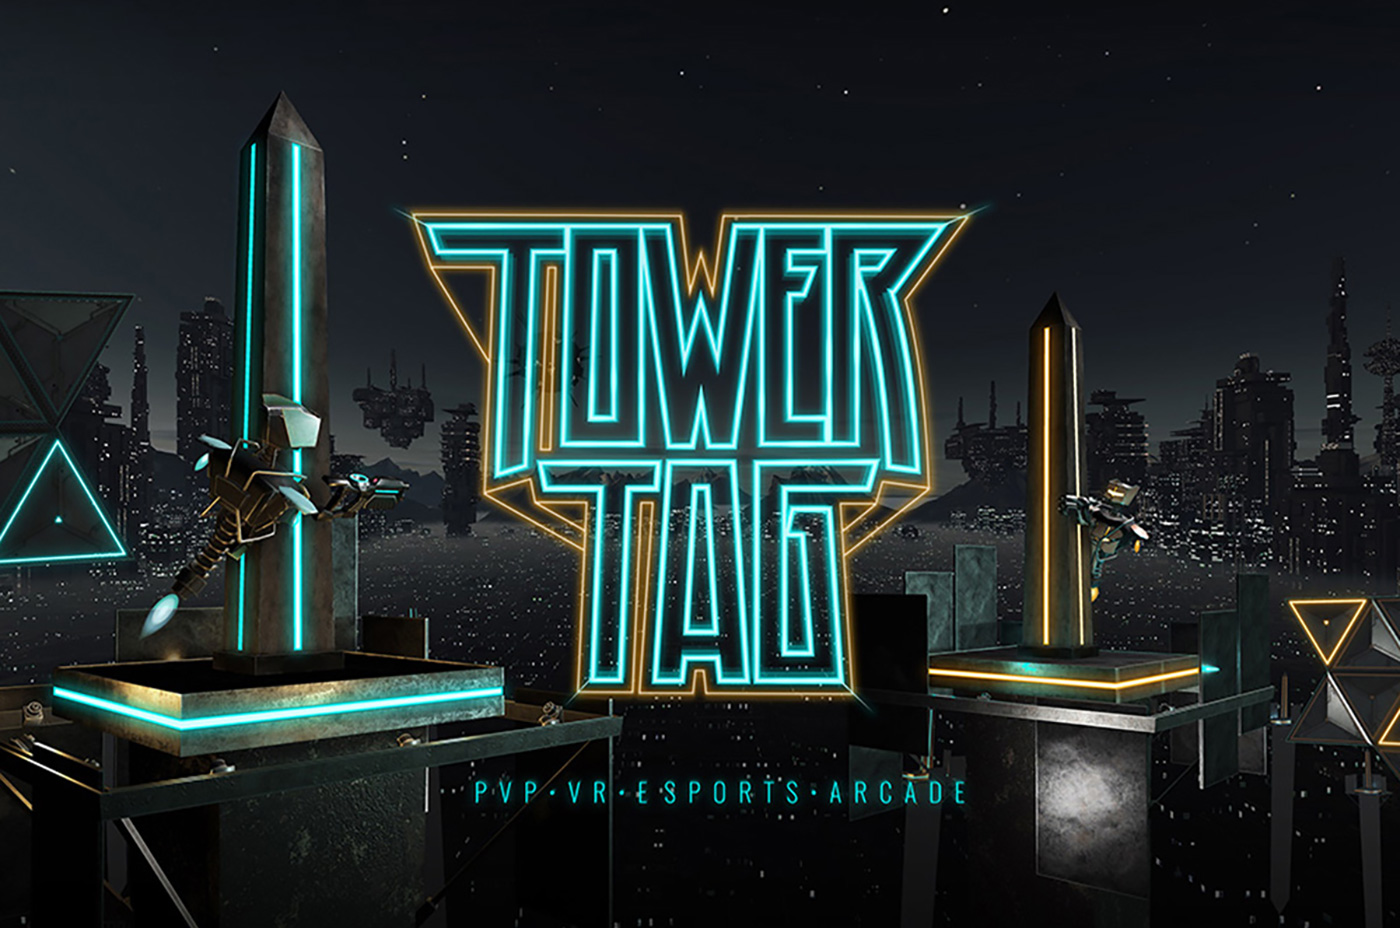 TOWER TAG